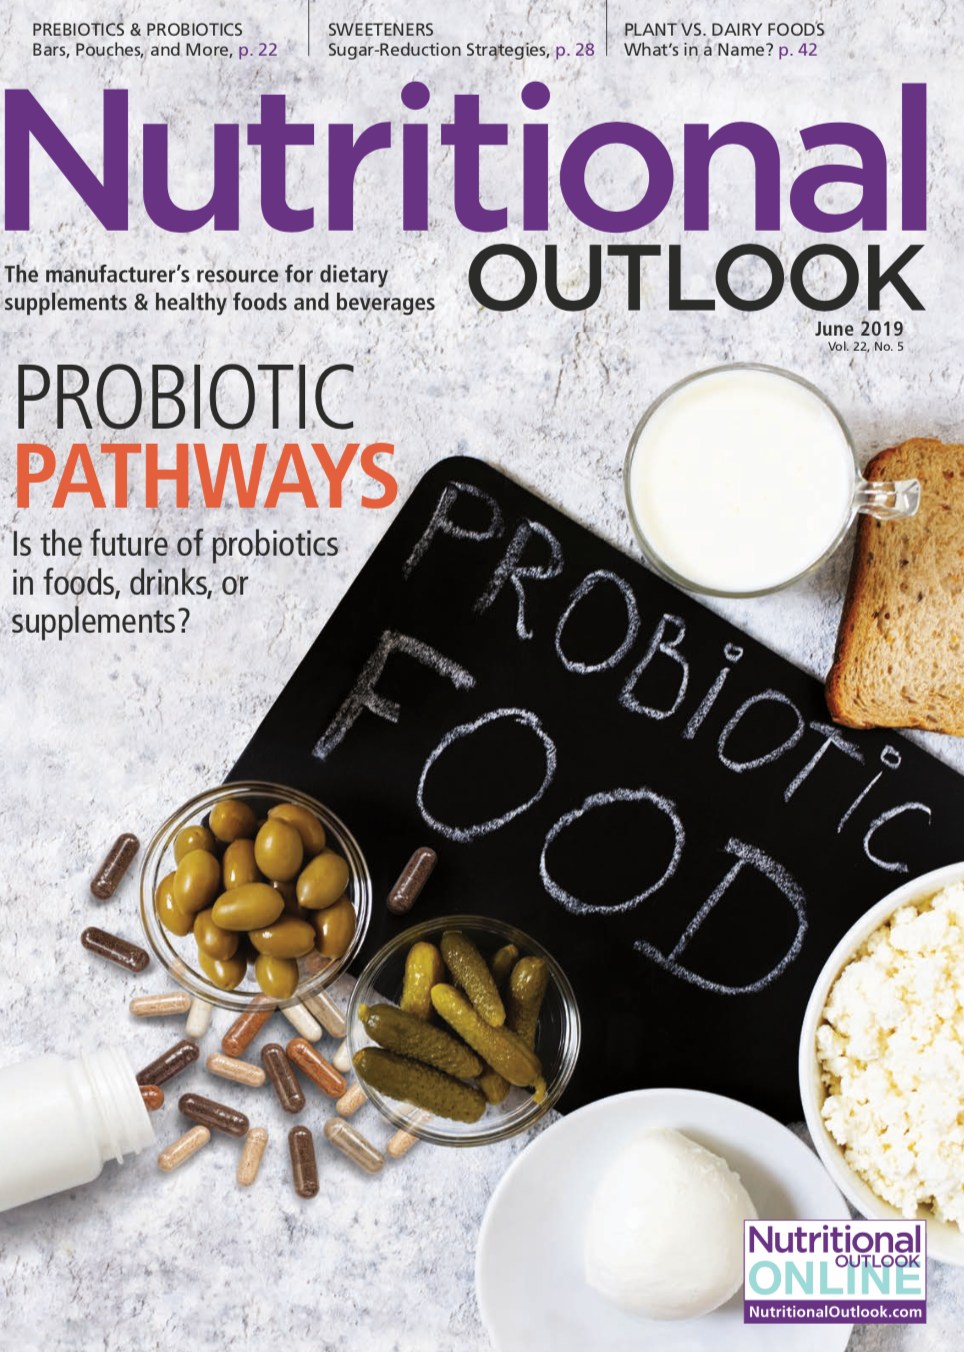 Nutritional Outlook Vol. 22 No. 5